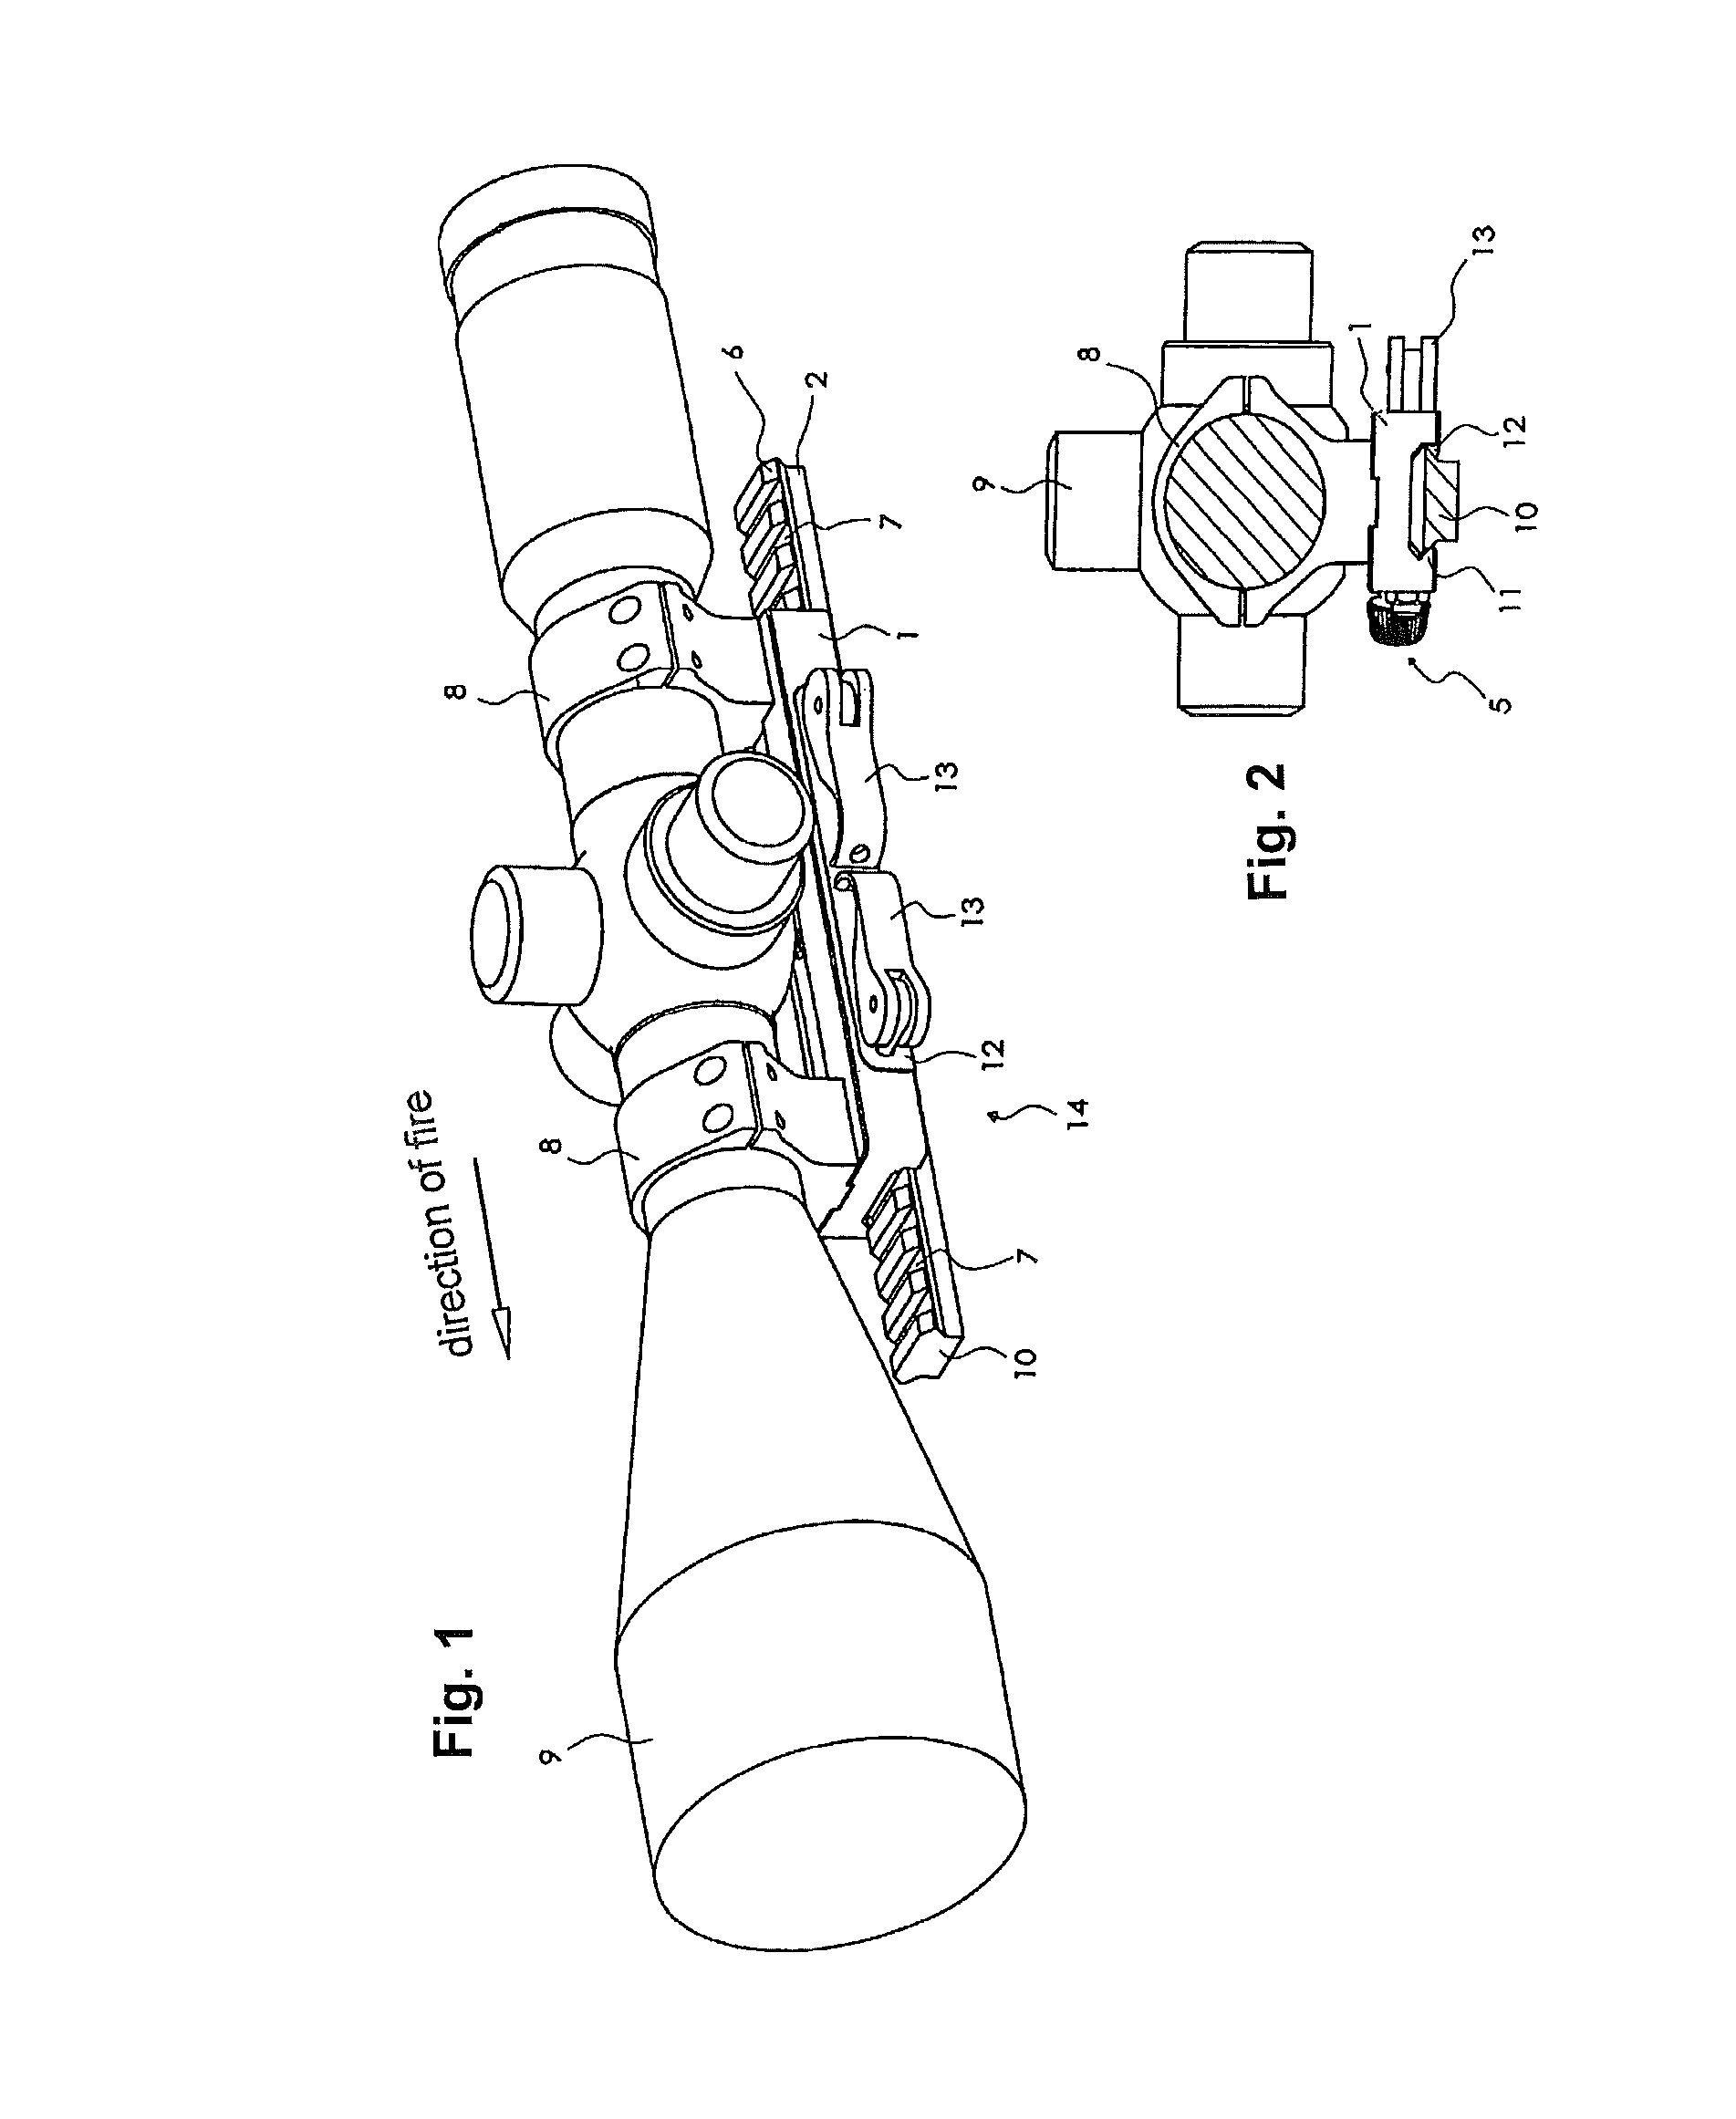 Device for mounting an additional device to a firearm